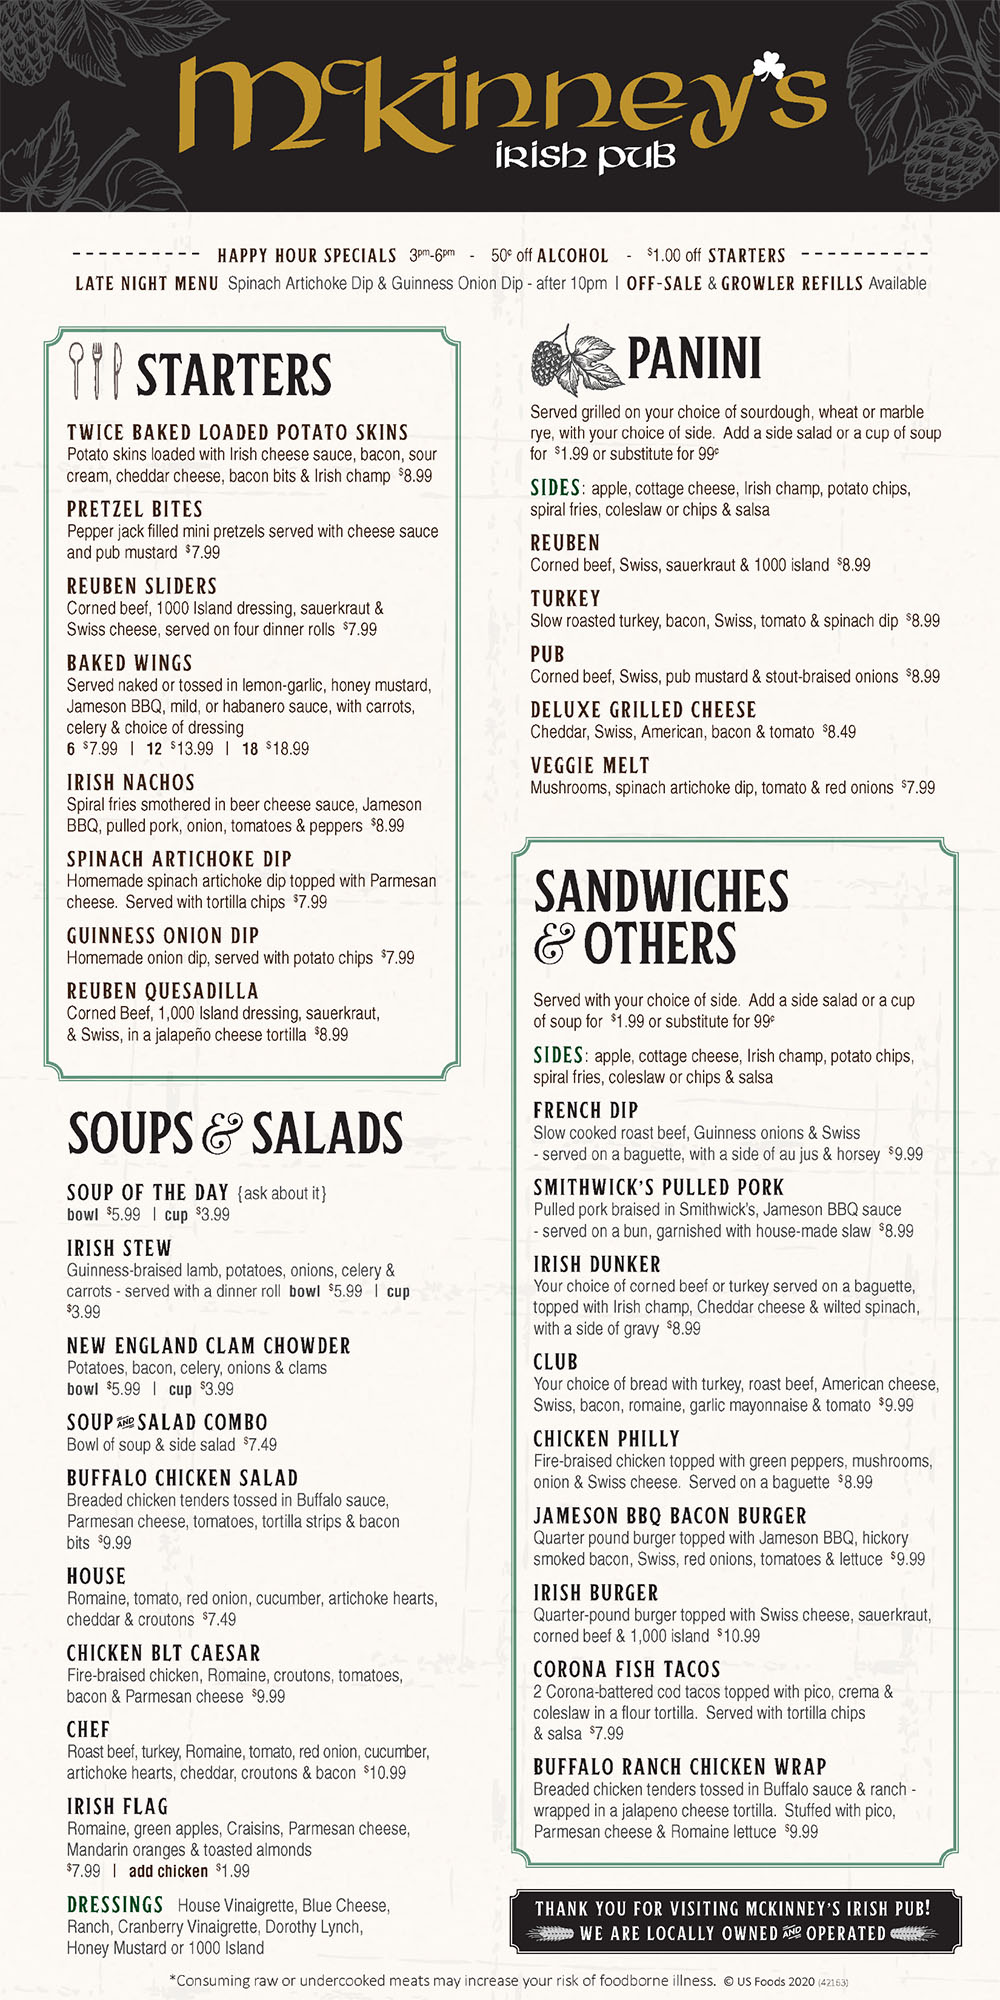 McKinney's Irish Pub Menu
151 N 8th St, Ste 140 • Lincoln, Nebraska 68508
(402) 477-0021
Open Daily 11AM - 10PM
Seasonal Chef Menu
Open Faced Turkey
Your choice of bread topped with oven roasted turkey,
Irish champ and Guinness onion gravy. $8.99
Tuna Mac and Cheese
Homemade tuna salad mixed with cheddar cheese and topped
with a butter panko crust. Served with a dinner roll $8.99
Irish Coddle
Baby red potatoes mixed with caramelized onions, Irish sausage,
and bacon. Baked to perfection and topped with green onions,
cheddar cheese, and served with a dinner roll. $9.99
Hot Beef Sandwich
Slow cooked roast beef on toasted sourdough and topped
with Irish champ and Guinness onion gravy $8.99
Fiesta Fish Salad
Corona beer-battered cod, romaine lettuce,
Parmesan cheese, pico, tortilla strips, and served with your
choice of dressing. $8.99
Tuna Melt
Homemade tuna salad topped with tomatoes
and cheddar cheese. Served on your choice of sourdough,
wheat, or marble rye bread and a side of your choice. $8.99
Starters
Twice Baked Loaded Potato Skins
Potato skins loaded with Irish cheese sauce, bacon, sour cream,
cheddar cheese, bacon bits, and Irish champ. $8.99
Pretzel Bites
Pepperjack filled mini pretzel served with cheese sauce and pub
mustard $7.49
Reuben Sliders
Corned beef, 1000 Island dressing, sauerkraut, and Swiss cheese
served on a dinner roll. $7.99
Irish Nachos
Spiral fries smothered in Jameson cheese sauce, BBQ sauce, pulled
pork, onion, tomatoes, and peppers $8.99
Guinness Onion Dip
Served with potato chips $6.49
Spinach Artichoke Dip
Homemade spinach artichoke dip served with tortilla chips $6.99
Baked Wings
Baked Wings- served naked or tossed in lemon-garlic, Jameson
BBQ, mild, or habanero sauce w/carrots, celery, and dressing
6 for $6.99 • 12 for $12.99 • 18 for $17.99
Soups
Irish Stew
Cup $3.49 • Bowl $5.99
Clam Chowder
Cup $3.49 • Bowl $5.99
Soup of the day
Cup $3.49 • Bowl $5.99
Soup and Salad combo
Your choice of soup and a side salad $6.99
Salads
Dressings: House Vinaigrette, Blue Cheese, Ranch, Cranberry Vinaigrette,
Dorothy Lynch, or 1000 island
Chicken BLT Caesar
Romaine, fire braised chicken, tomatoes, bacon,
and Parmesan $8.99
Chef
Spinach, romaine, tomato, red onion, cucumber,
artichoke hearts, cheddar, croutons, bacon, roast beef,
turkey, and a hardboiled egg $9.99
House
Spinach, romaine, tomato, red onion, cucumber,
artichoke hearts, cheddar, croutons, and dressing $6.99
Buffalo Chicken Salad
Breaded chicken tenders tossed in buffalo sauce above a
fresh bed of romaine and topped with Parmesan cheese,
tomatoes, bacon bits, and your choice of salad dressing. $8.99
Paninis
Served grilled on your choice of Sourdough, Wheat, or Marble Rye
Sides include: apple, cottage cheese, Irish champ, potato chips, spiral fries
Add a side salad or a cup of soup for $1.99 or substitute for $.99
Reuben
Corned beef, Swiss, sauerkraut, and 1000 island $8.99
Turkey
Pressed w/bacon, Swiss, tomato, and spinach dip $8.99
Pub
Corned beef, Swiss, pub mustard, and stout braised onions. $8.99
Deluxe Grilled Cheese
Cheddar, American, Swiss, bacon, and tomato. $7.99
Veggie Melt
Mushrooms, spinach artichoke dip, tomato, and red onions. $7.99
Sandwiches & More
Sides include: apple, cottage cheese, Irish champ, potato chips, spiral fries
French Dip
Guinness onions, Swiss; served on a baguette,
with a side of au jus and horsey $9.99
Murphy’s Pulled Pork
Braised in Murphy’s Red, Jameson BBQ sauce;
served on a bun, garnished with house-made slaw $8.99
Irish Dunker
Your choice of corned beef or turkey served on a baguette.
Topped with Irish champ, cheddar cheese, and wilted spinach;
with a side of gravy $8.99
Club
Your choice of bread with turkey, roast beef,
American cheese, Swiss, bacon, romaine,
garlic mayonnaise and tomato $9.49
Jameson BBQ Bacon Burger
Quarter pound burger topped with Jameson BBQ,
hickory smoked bacon, Swiss cheese, red onions,
tomatoes and lettuce. $9.99
Guinness Fish Tacos
Guinness Fish Tacos- 2 Corona battered cod tacos
topped with pico, crema, and coleslaw in a flour
tortilla. Served with tortilla chips and salsa. $7.99
Irish Burger
Quarter pound burger topped with Swiss cheese,
sauerkraut, corned beef, and thousand island $10.99
Chicken Philly
Fire braised chicken topped with green peppers, mushrooms,
onion and swiss cheese served on baguette.
Your choice of side $8.99
Buffalo Ranch Chicken Wrap
Breaded chicken tenders tossed in buffalo sauce and ranch
wrapped in a cheese jalapeno flour tortilla.
Stuffed with pico, parmesan cheese, and romaine lettuce.
Served with tortilla chips and salsa $8.99
entrees
Served with a dinner roll. add a side salad or a cup of soup for $1.99
Pub Mac and Cheese
Fire braised ham, Irish cheese sauce, green peppers
and red onions, topped with a butter panko crust $8.99
Corned Beef and Cabbage
Steamed cabbage, potatoes, and carrots $12.99
Shepherd’s Pie
Fresh lamb and vegetables in a rich sauce,
baked with an Irish Champ top $10.99
Bangers and Mash
House-made pork sausage on Irish Champ w/onion
gravy and wilted spinach $10.99
Fish and Chips
Fish and Chips- Corona beer-battered cod, spiral fries,
house tartar sauce, lime and lemon $10.99
Irish Bowl
Cheddar cheese, Irish Champ potatoes, corn, gravy,
corned beef, and chives $9.99
Chicken Tender Basket
4 Breaded chicken tenders served with spiral fries $9.99
Kids Menu
Chicken Tender Basket
Chicken Tenders served with your choice of
dipping sauce and choice of side $6.49
Fish and Chips
4oz Battered cod server with tarter sauce
and spirals fries $6.49
Mac and Cheese
Baked Macaroni, ham and cheese
served with a choice of side $6.49
Grilled Cheese Sandwich
American, Swiss and Cheddar Cheese served on your
choice of bread (Sourdough, Wheat, or Marble Rye)
and your choice of side $5.99
Kids Cheese Burger
Quarter pound burger topped with American cheese,
lettuce, onions, and Tomatoes and choice of side $6.49
Desserts
Guinness Float
Guinness crowned with a scoop of cinnamon ice cream $7.49
Bailey’s Cheesecake
Your choice of vanilla or chocolate,
topped with Bailey’s whip cream $5.99
Bread Pudding
Homemade bread pudding
topped with Cinnamon Ice Cream $5.99